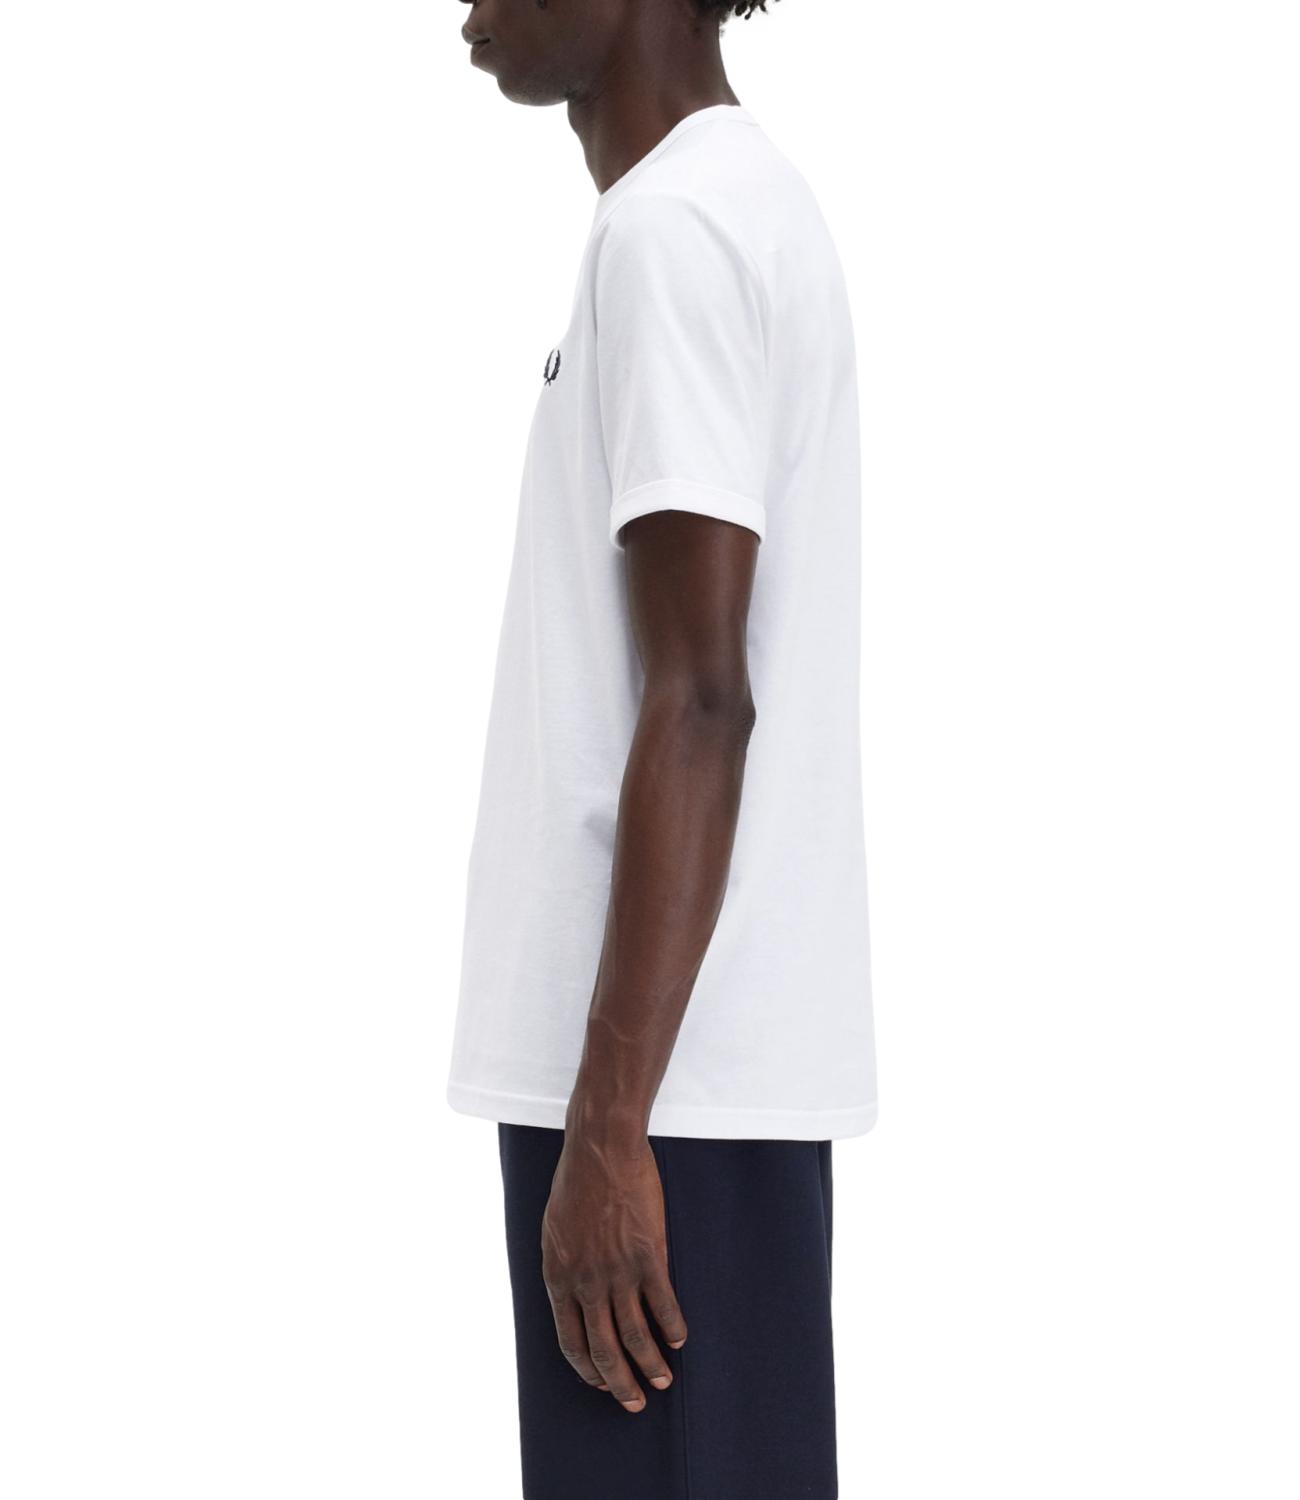 Fred Perry t-shirt bianca uomo